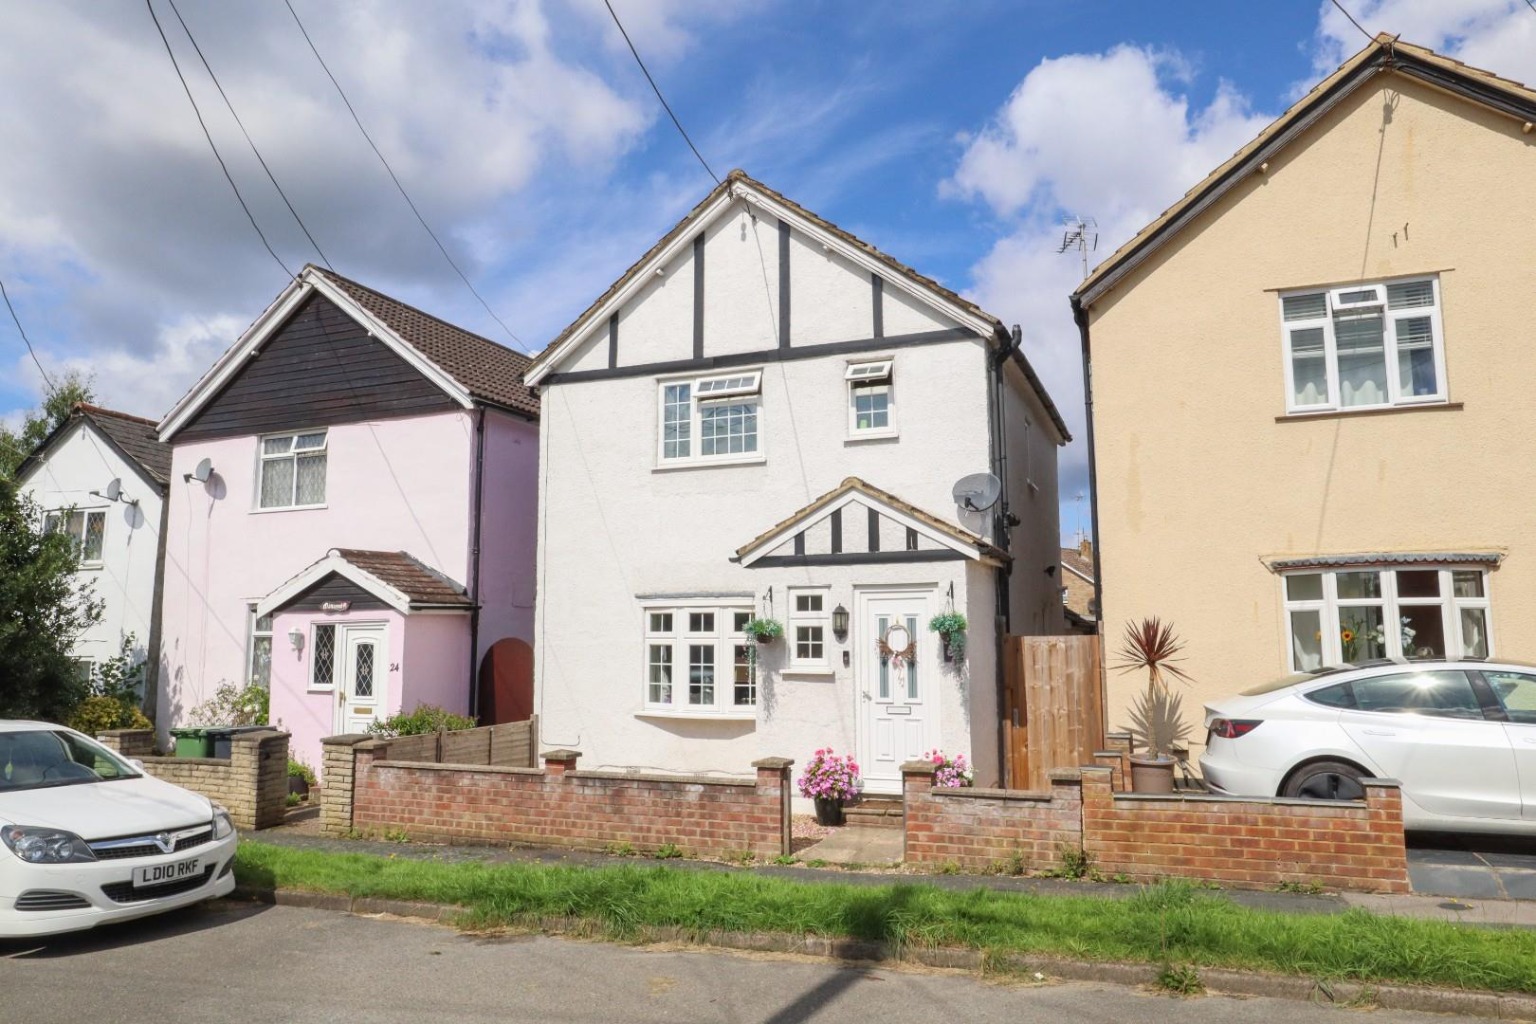 This lovely detached home is located in the heart of Frimley Green, just a short walk away from the local schools, shops and other amenities.